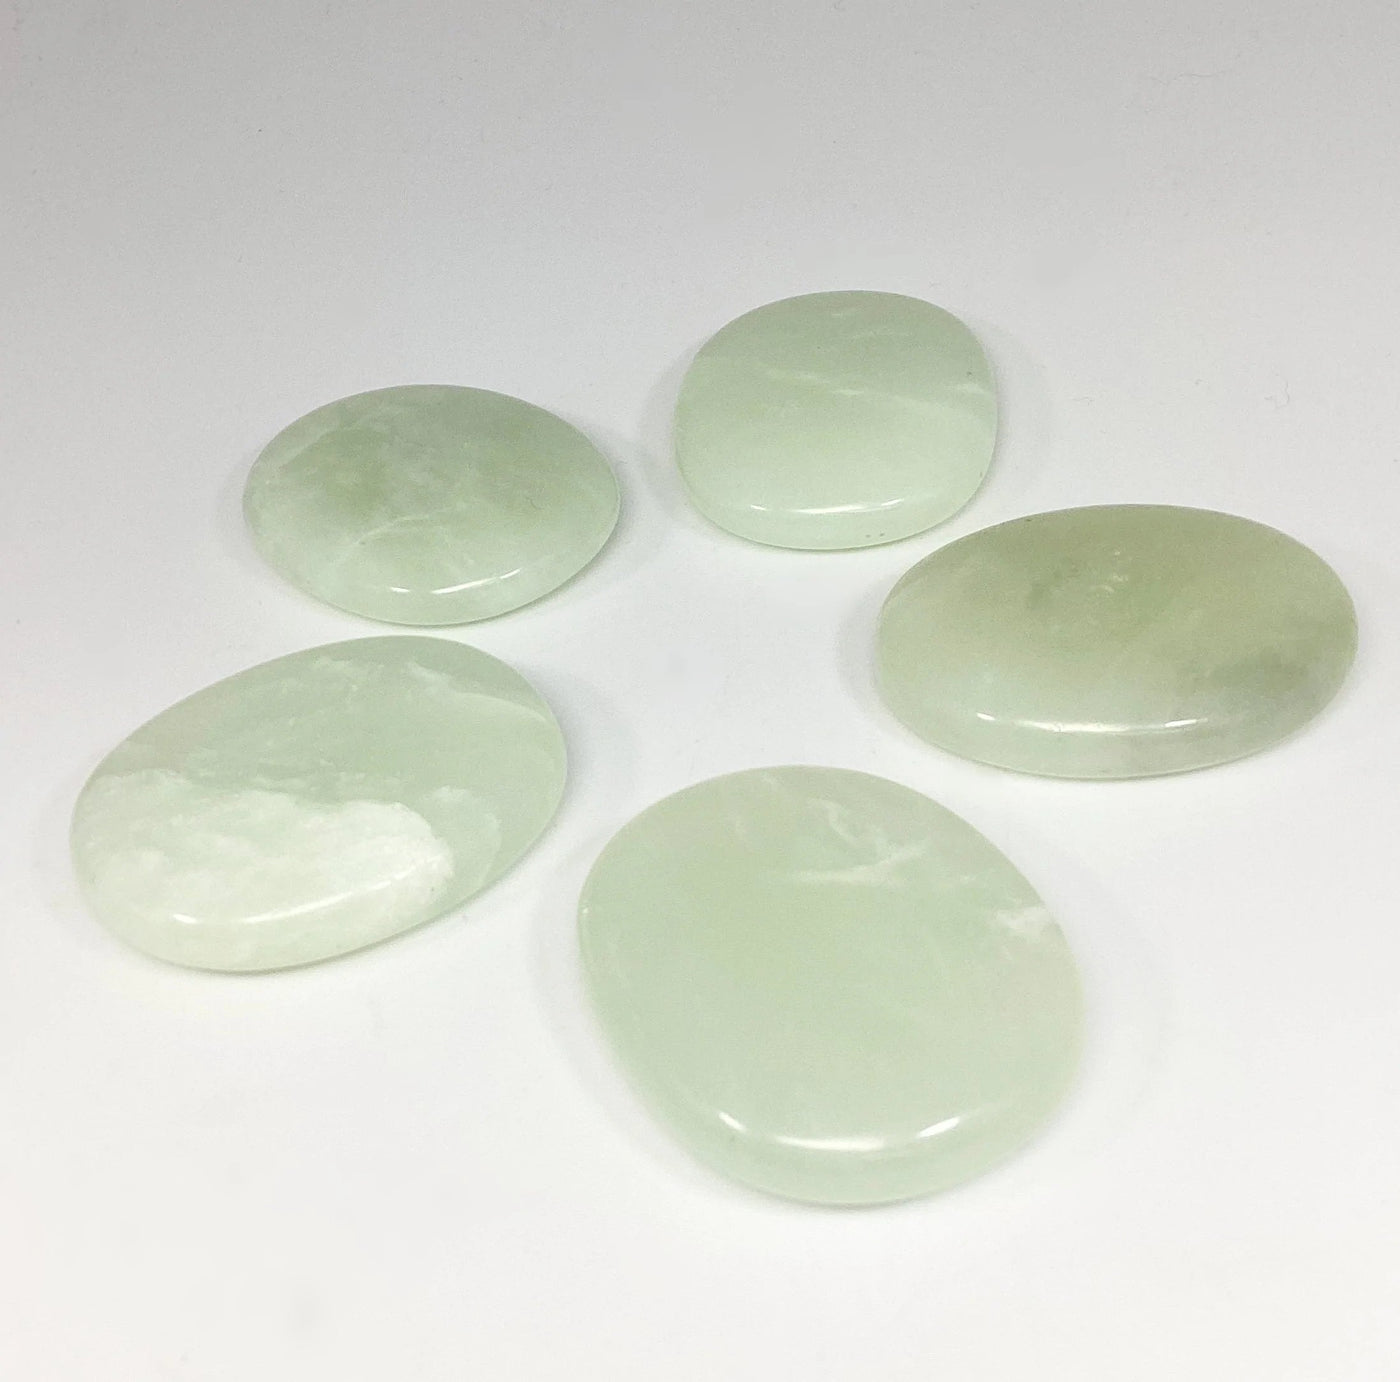 New Jade Touch Stone at $25 Each